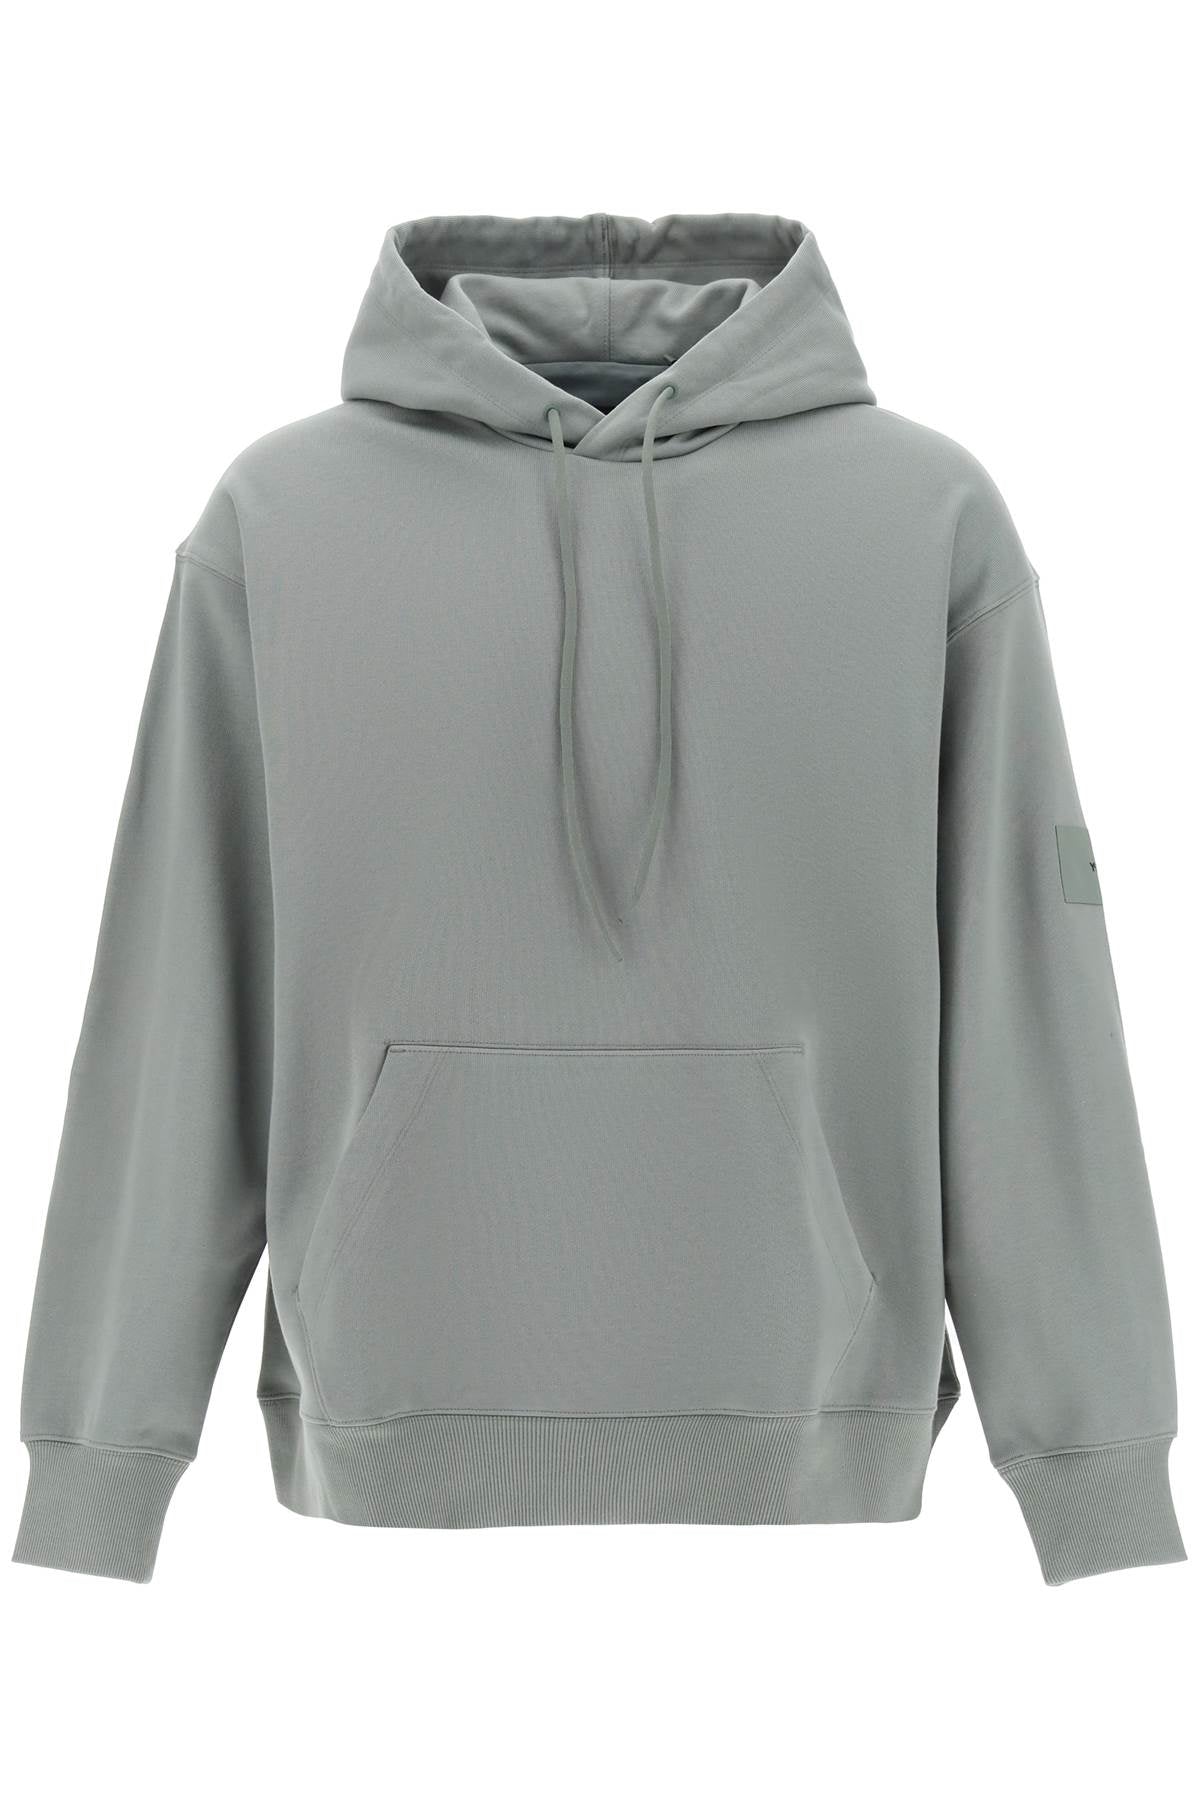 Y-3 hoodie in cotton french terry-0